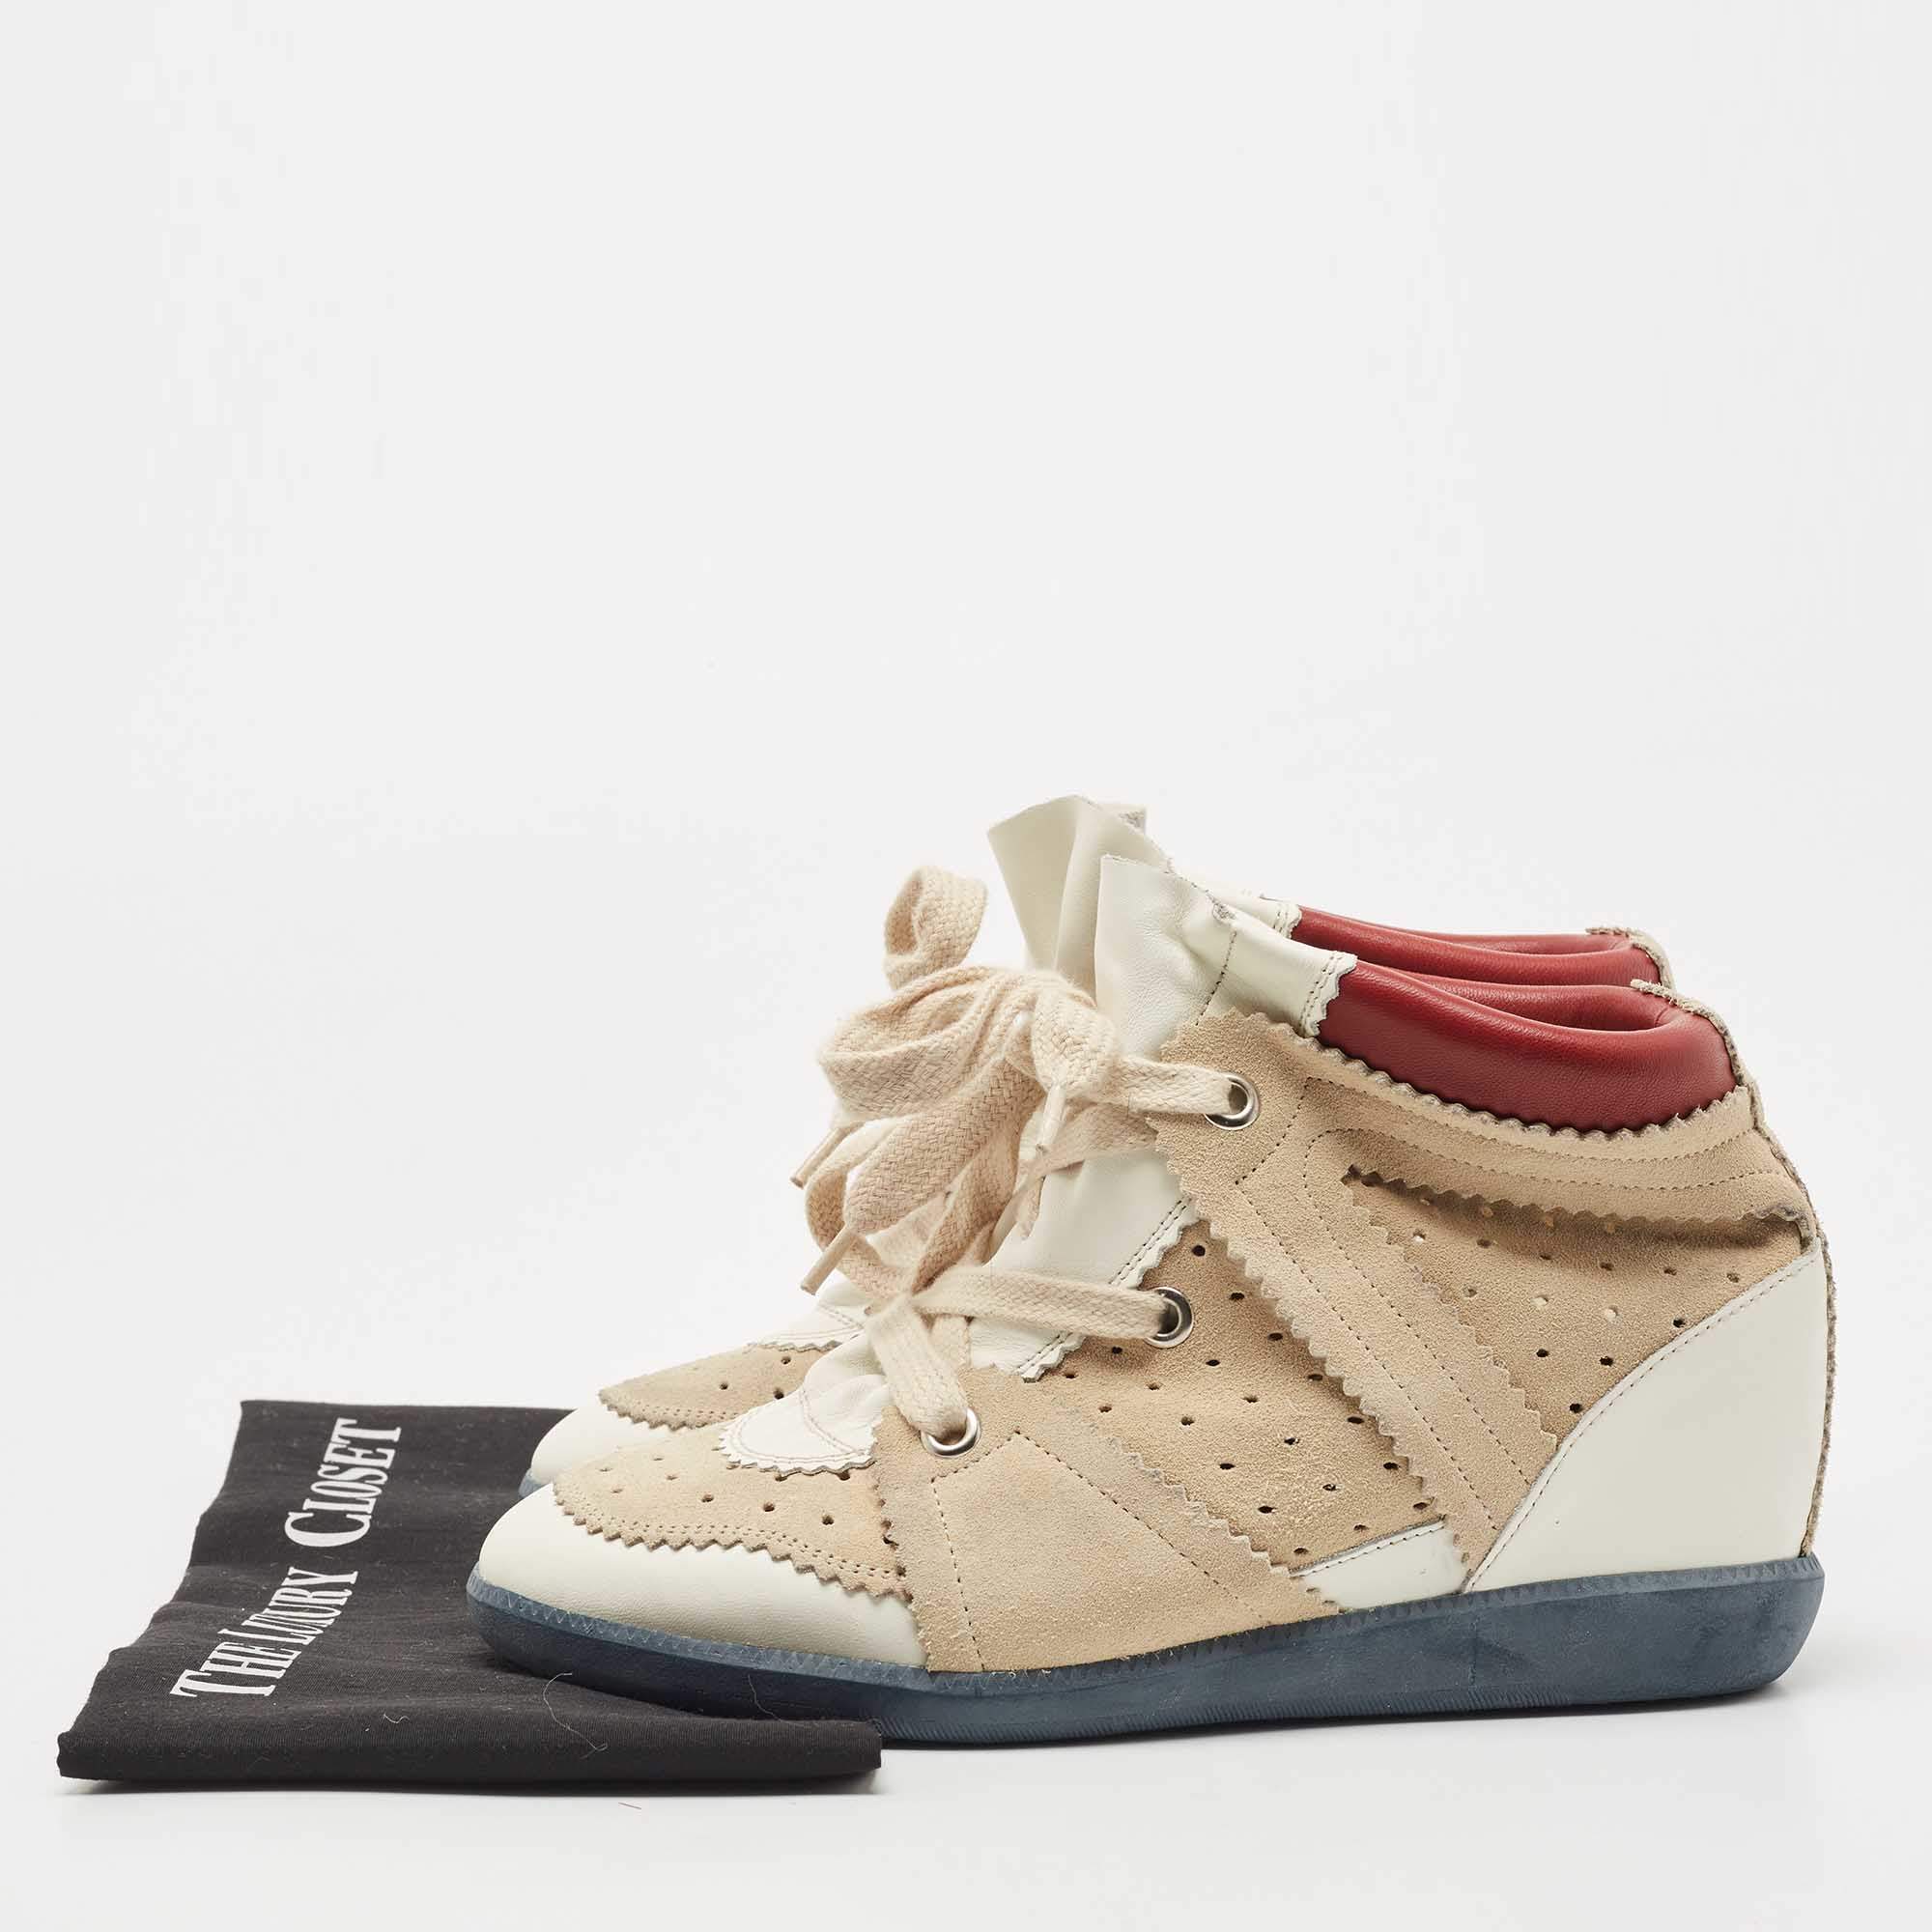 Isabel Marant Tricolor Leather and Suede Wedge Sneakers Size 40 Isabel Marant |